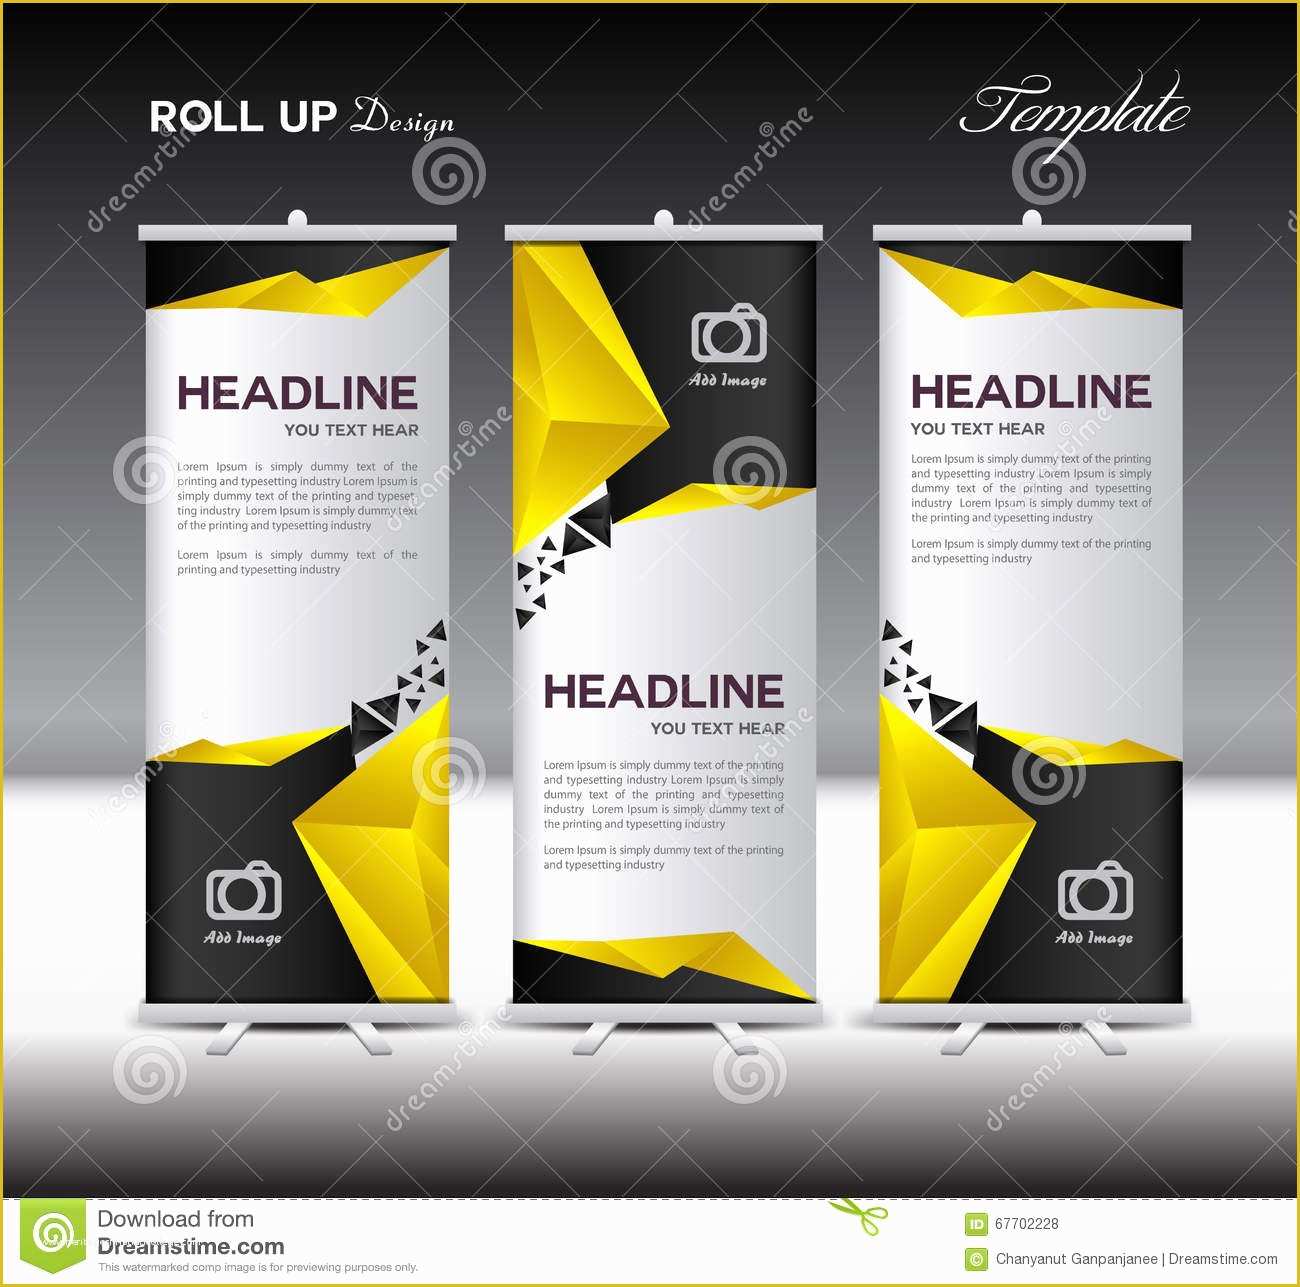 Roll Up Banner Design Template Free Download Of Yellow and Black Roll Up Banner Template Vector